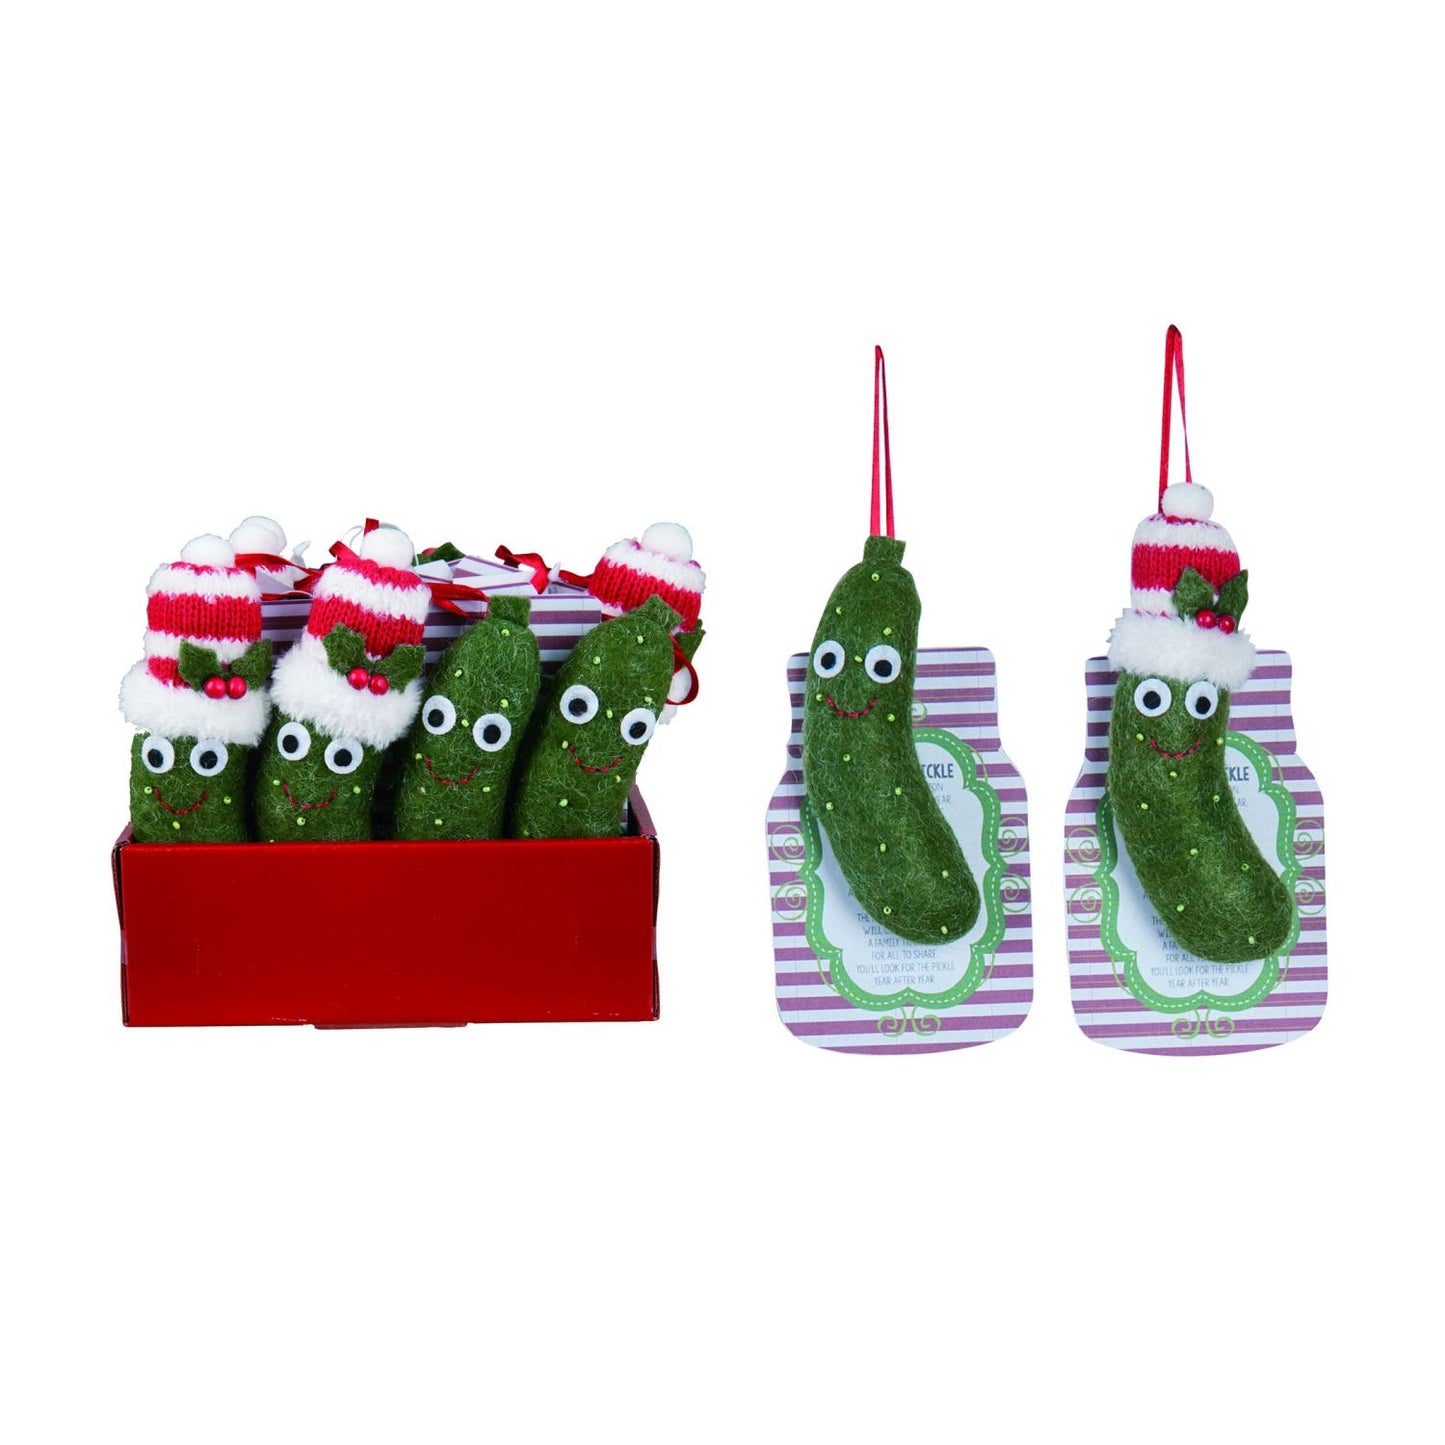 Transpac Felt Christmas Pickle Ornament Set of 12 with Display